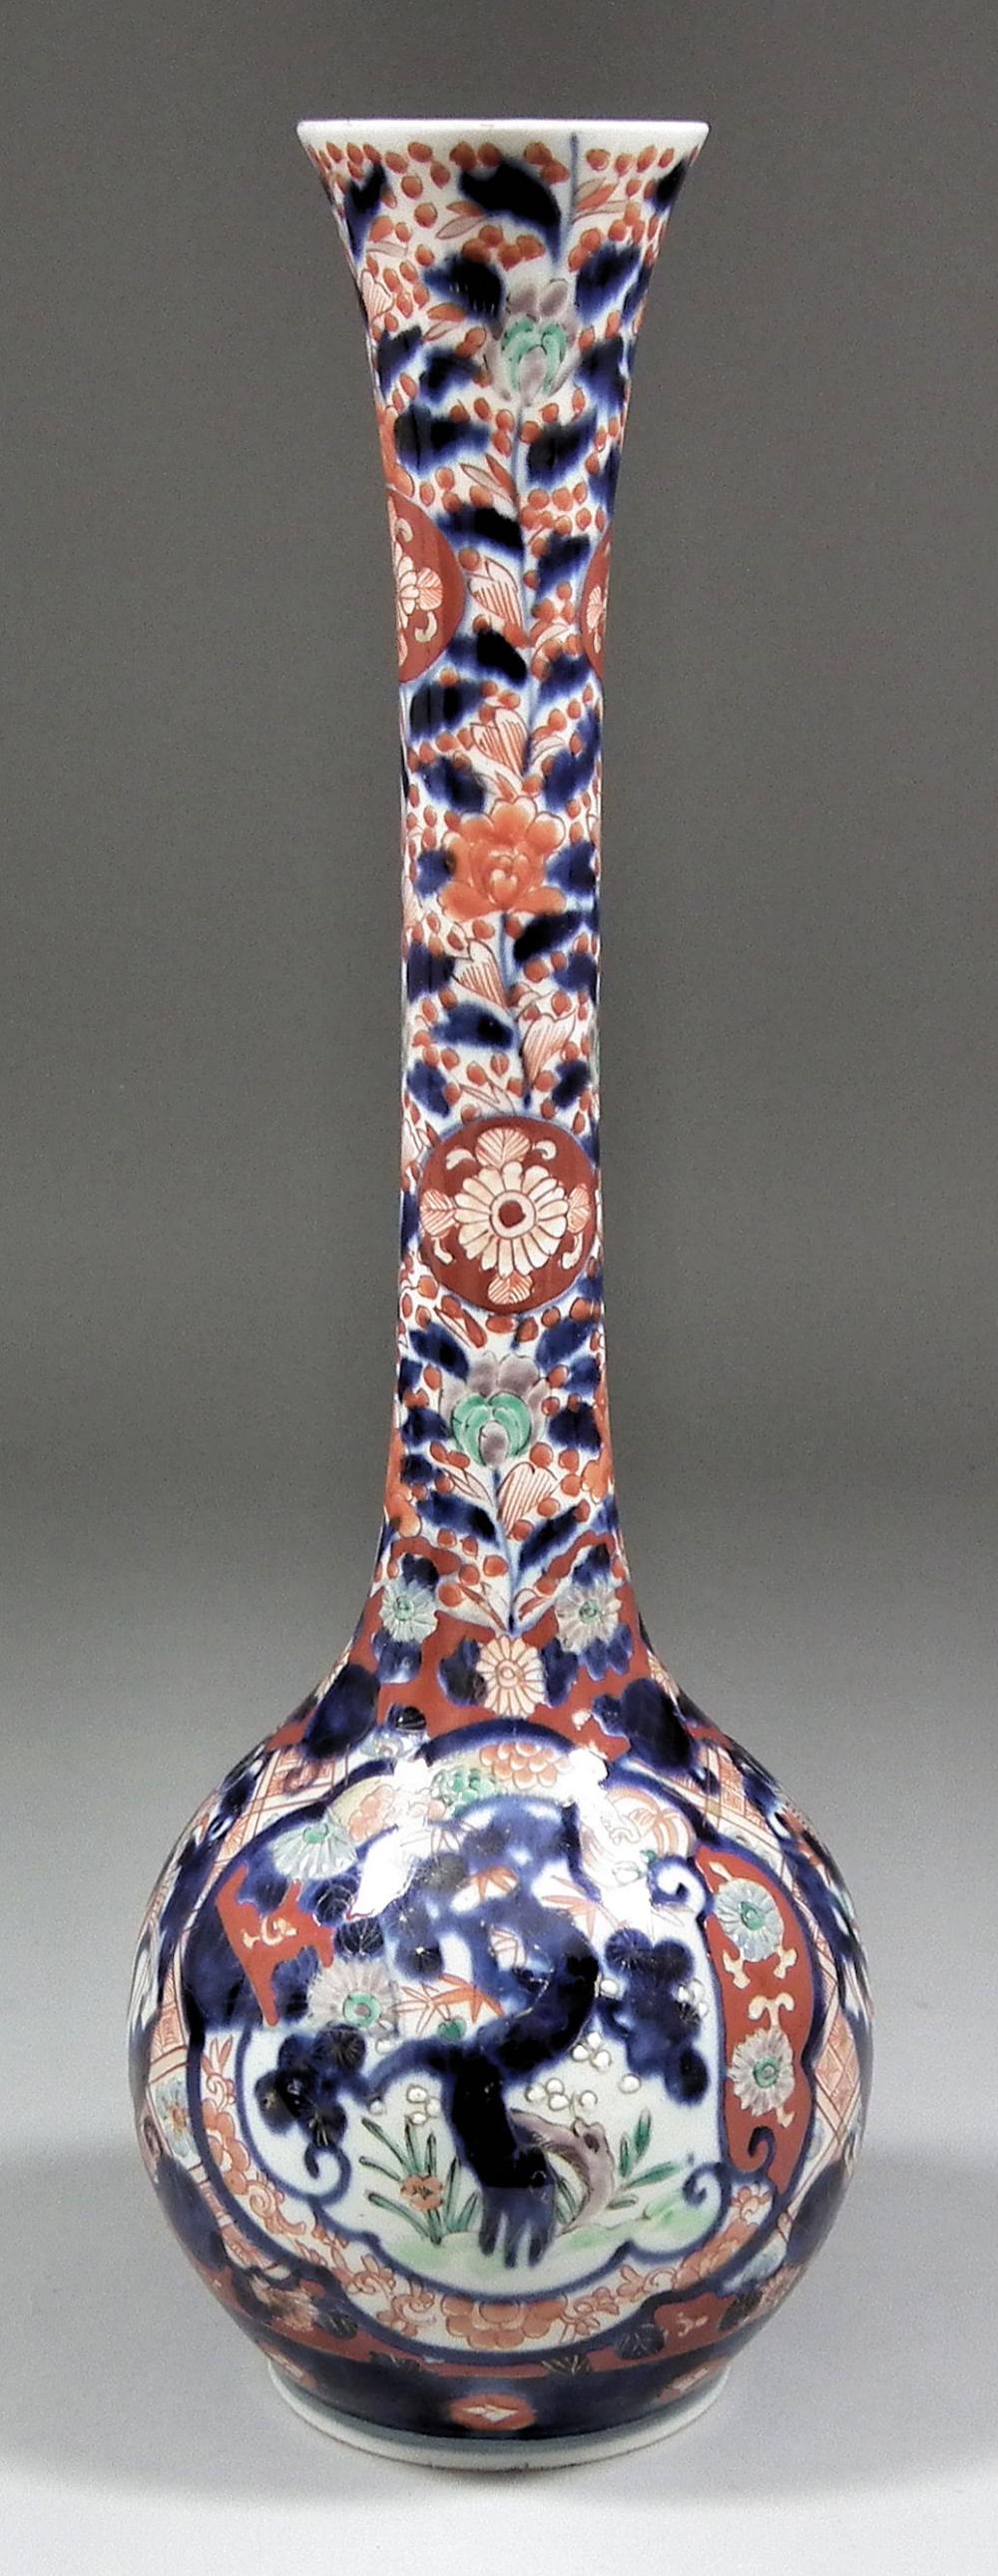 A Japanese porcelain bulbous vase with tall narrow neck decorated in the "Imari" palette with